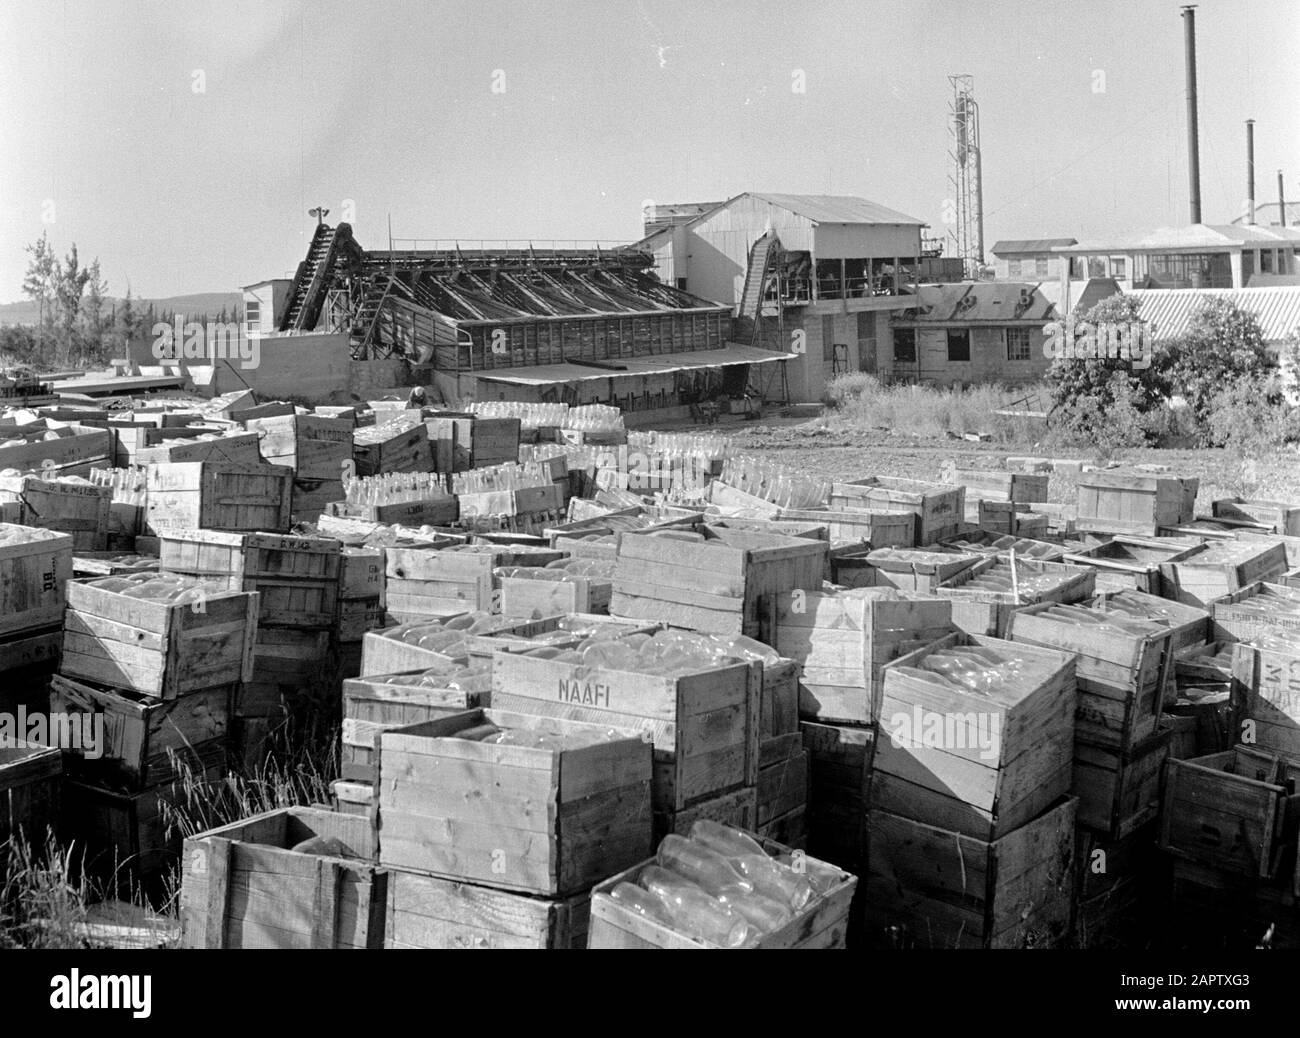 Israel 1948-1949: kibbutz Kiwath Brenner. Crates of empty bottles, presumably at the flushing of kibbutz Kiwath Brenner; in the foreground a crate with the inscription NAFI. Annotation: Kibbutz Kiwath Brenner is also referred to as Givat Brenner. NAAFI (Navy, Army and Air Force Institutes) is a British organization of military catering and military catering. For the first time, the first time the first time is to be in the world. Stock Photo